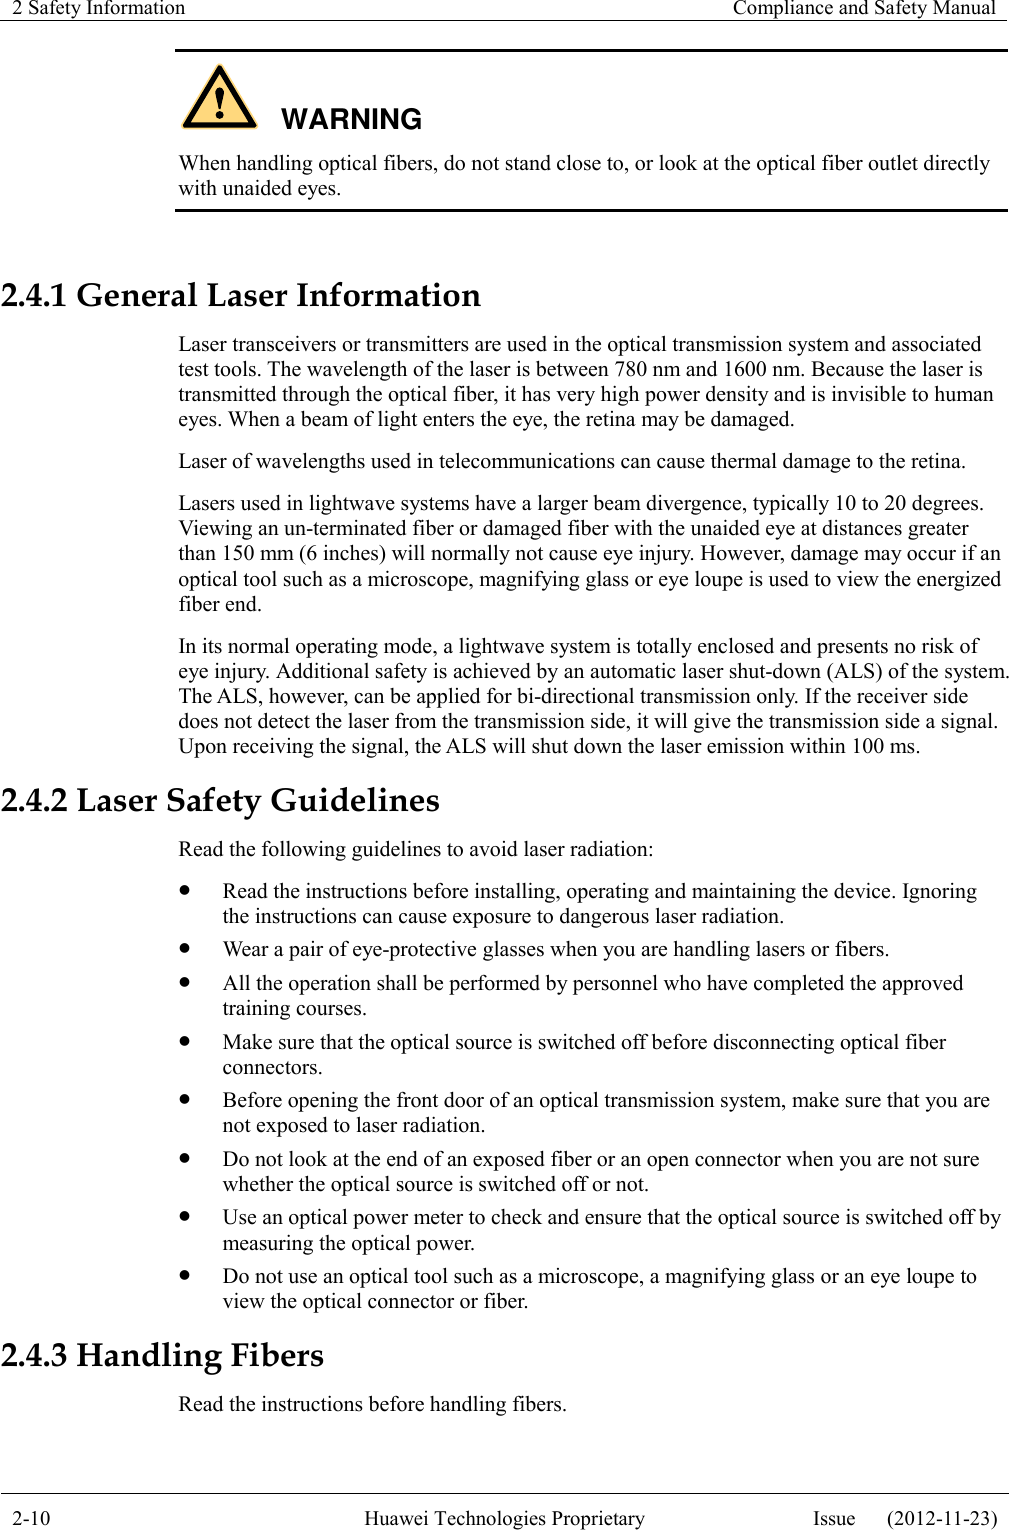 2 Safety Information    Compliance and Safety Manual  2-10 Huawei Technologies Proprietary Issue      (2012-11-23)  WARNING When handling optical fibers, do not stand close to, or look at the optical fiber outlet directly with unaided eyes.  2.4.1 General Laser Information Laser transceivers or transmitters are used in the optical transmission system and associated test tools. The wavelength of the laser is between 780 nm and 1600 nm. Because the laser is transmitted through the optical fiber, it has very high power density and is invisible to human eyes. When a beam of light enters the eye, the retina may be damaged. Laser of wavelengths used in telecommunications can cause thermal damage to the retina. Lasers used in lightwave systems have a larger beam divergence, typically 10 to 20 degrees. Viewing an un-terminated fiber or damaged fiber with the unaided eye at distances greater than 150 mm (6 inches) will normally not cause eye injury. However, damage may occur if an optical tool such as a microscope, magnifying glass or eye loupe is used to view the energized fiber end. In its normal operating mode, a lightwave system is totally enclosed and presents no risk of eye injury. Additional safety is achieved by an automatic laser shut-down (ALS) of the system. The ALS, however, can be applied for bi-directional transmission only. If the receiver side does not detect the laser from the transmission side, it will give the transmission side a signal. Upon receiving the signal, the ALS will shut down the laser emission within 100 ms. 2.4.2 Laser Safety Guidelines Read the following guidelines to avoid laser radiation:  Read the instructions before installing, operating and maintaining the device. Ignoring the instructions can cause exposure to dangerous laser radiation.  Wear a pair of eye-protective glasses when you are handling lasers or fibers.  All the operation shall be performed by personnel who have completed the approved training courses.  Make sure that the optical source is switched off before disconnecting optical fiber connectors.  Before opening the front door of an optical transmission system, make sure that you are not exposed to laser radiation.  Do not look at the end of an exposed fiber or an open connector when you are not sure whether the optical source is switched off or not.  Use an optical power meter to check and ensure that the optical source is switched off by measuring the optical power.  Do not use an optical tool such as a microscope, a magnifying glass or an eye loupe to view the optical connector or fiber. 2.4.3 Handling Fibers Read the instructions before handling fibers. 